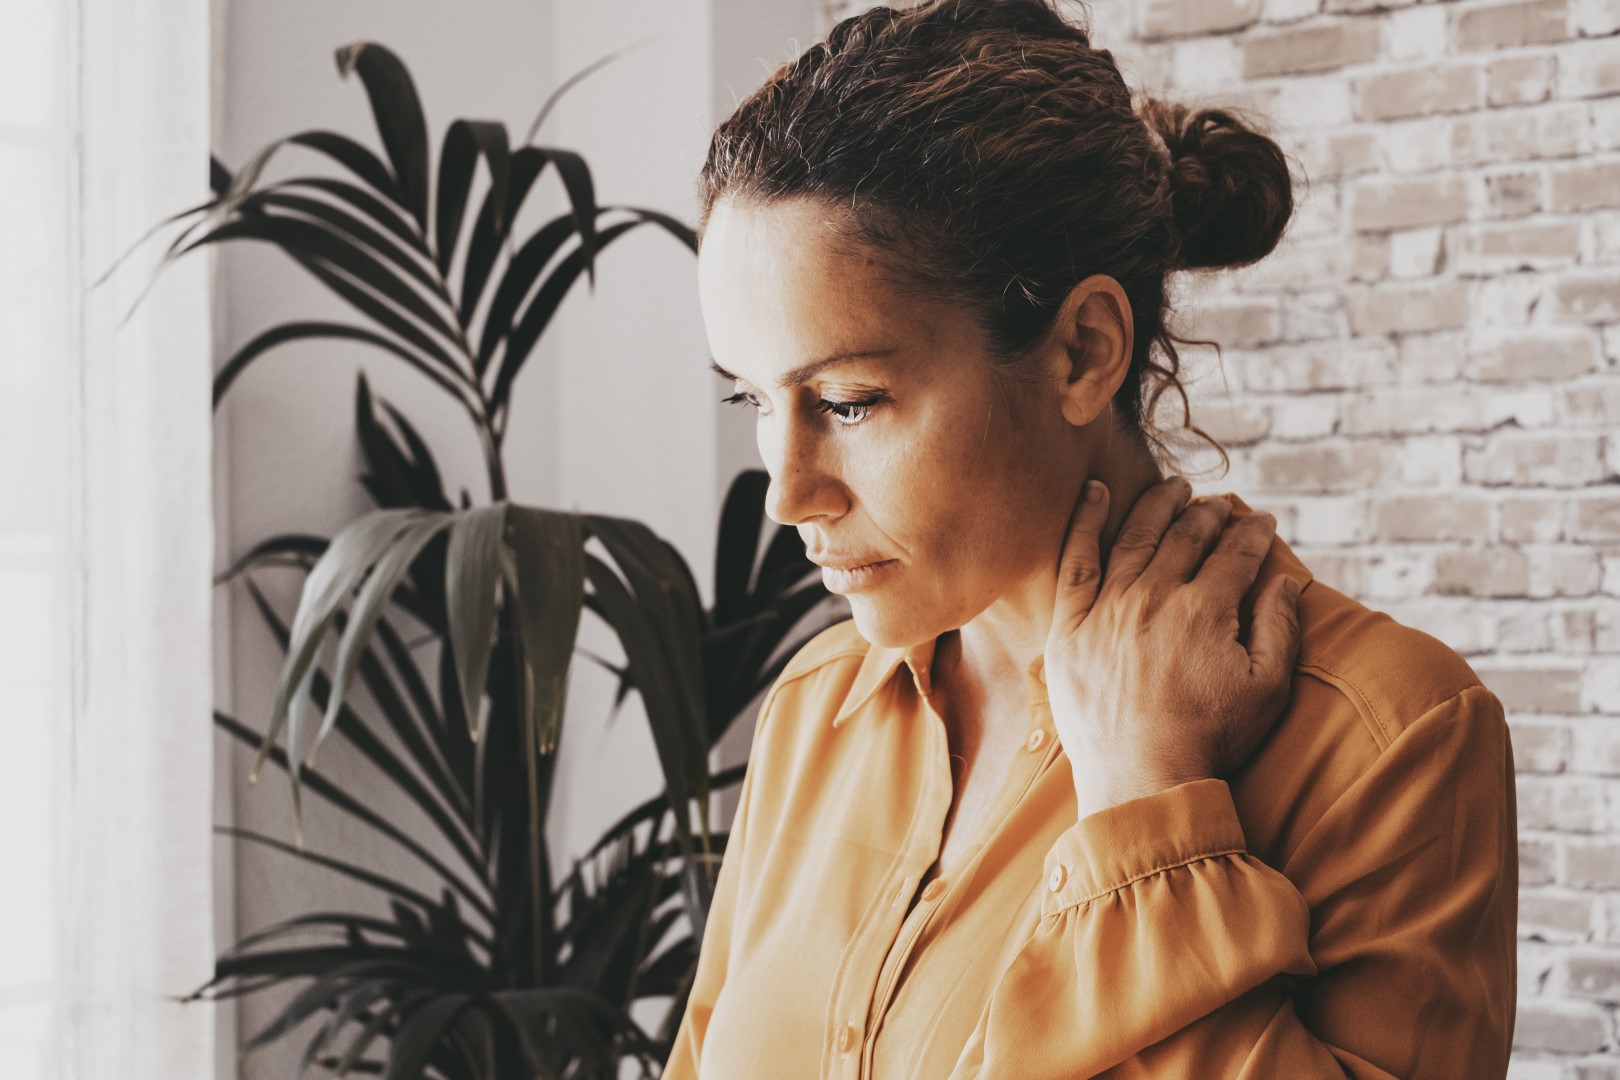 Telltale Signs of Caregiver Burnout and How Respite Care can Help